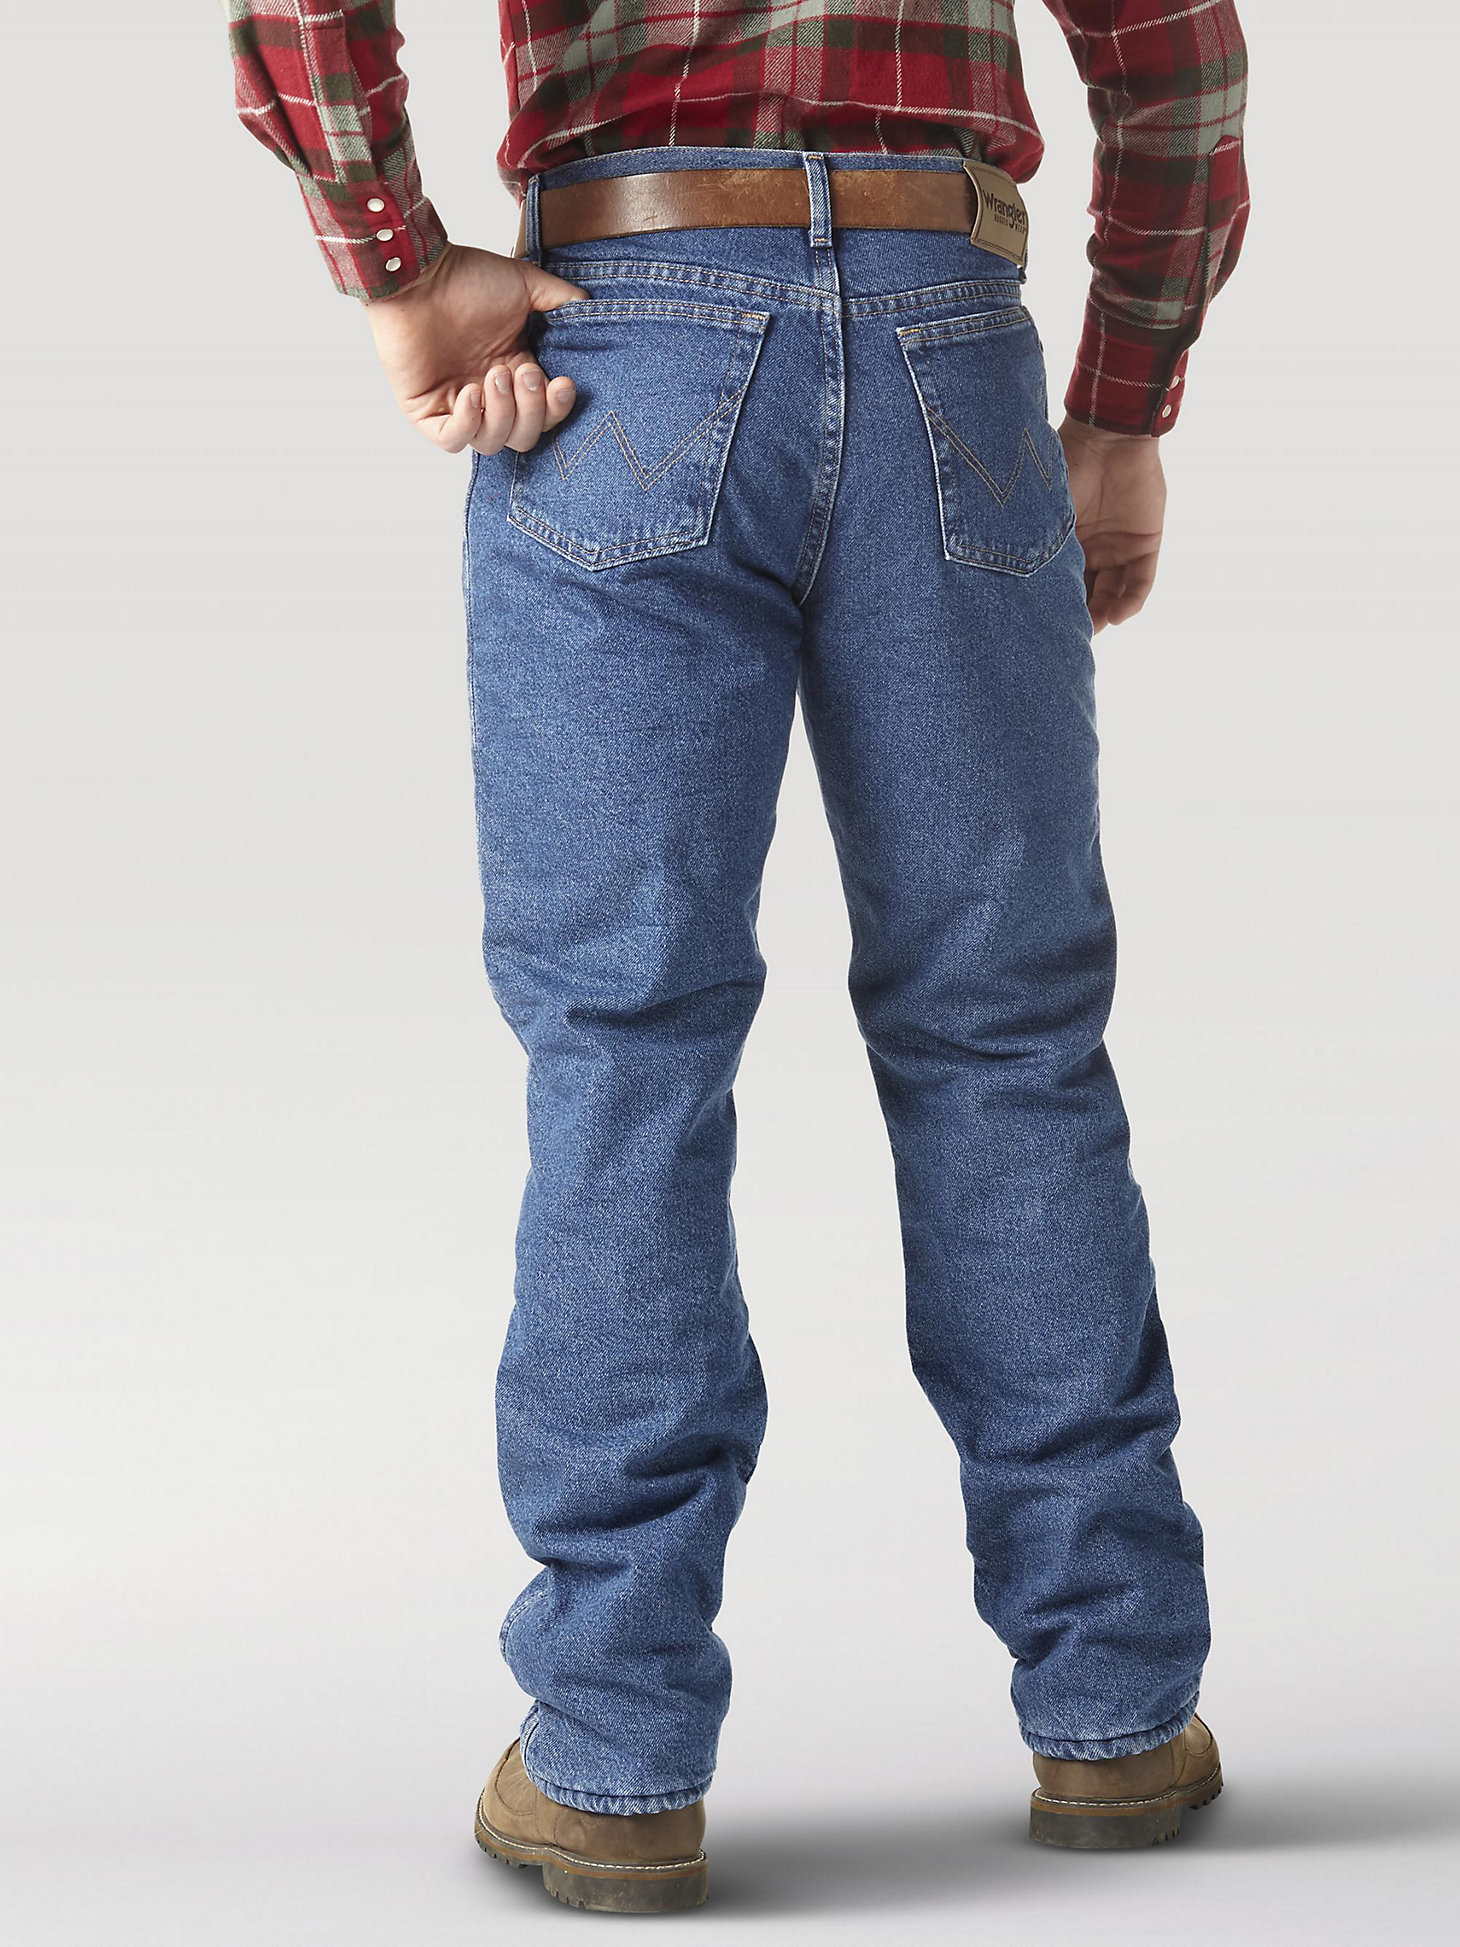 Wrangler Rugged Wear® Thermal Jean in Stonewashed alternative view 1